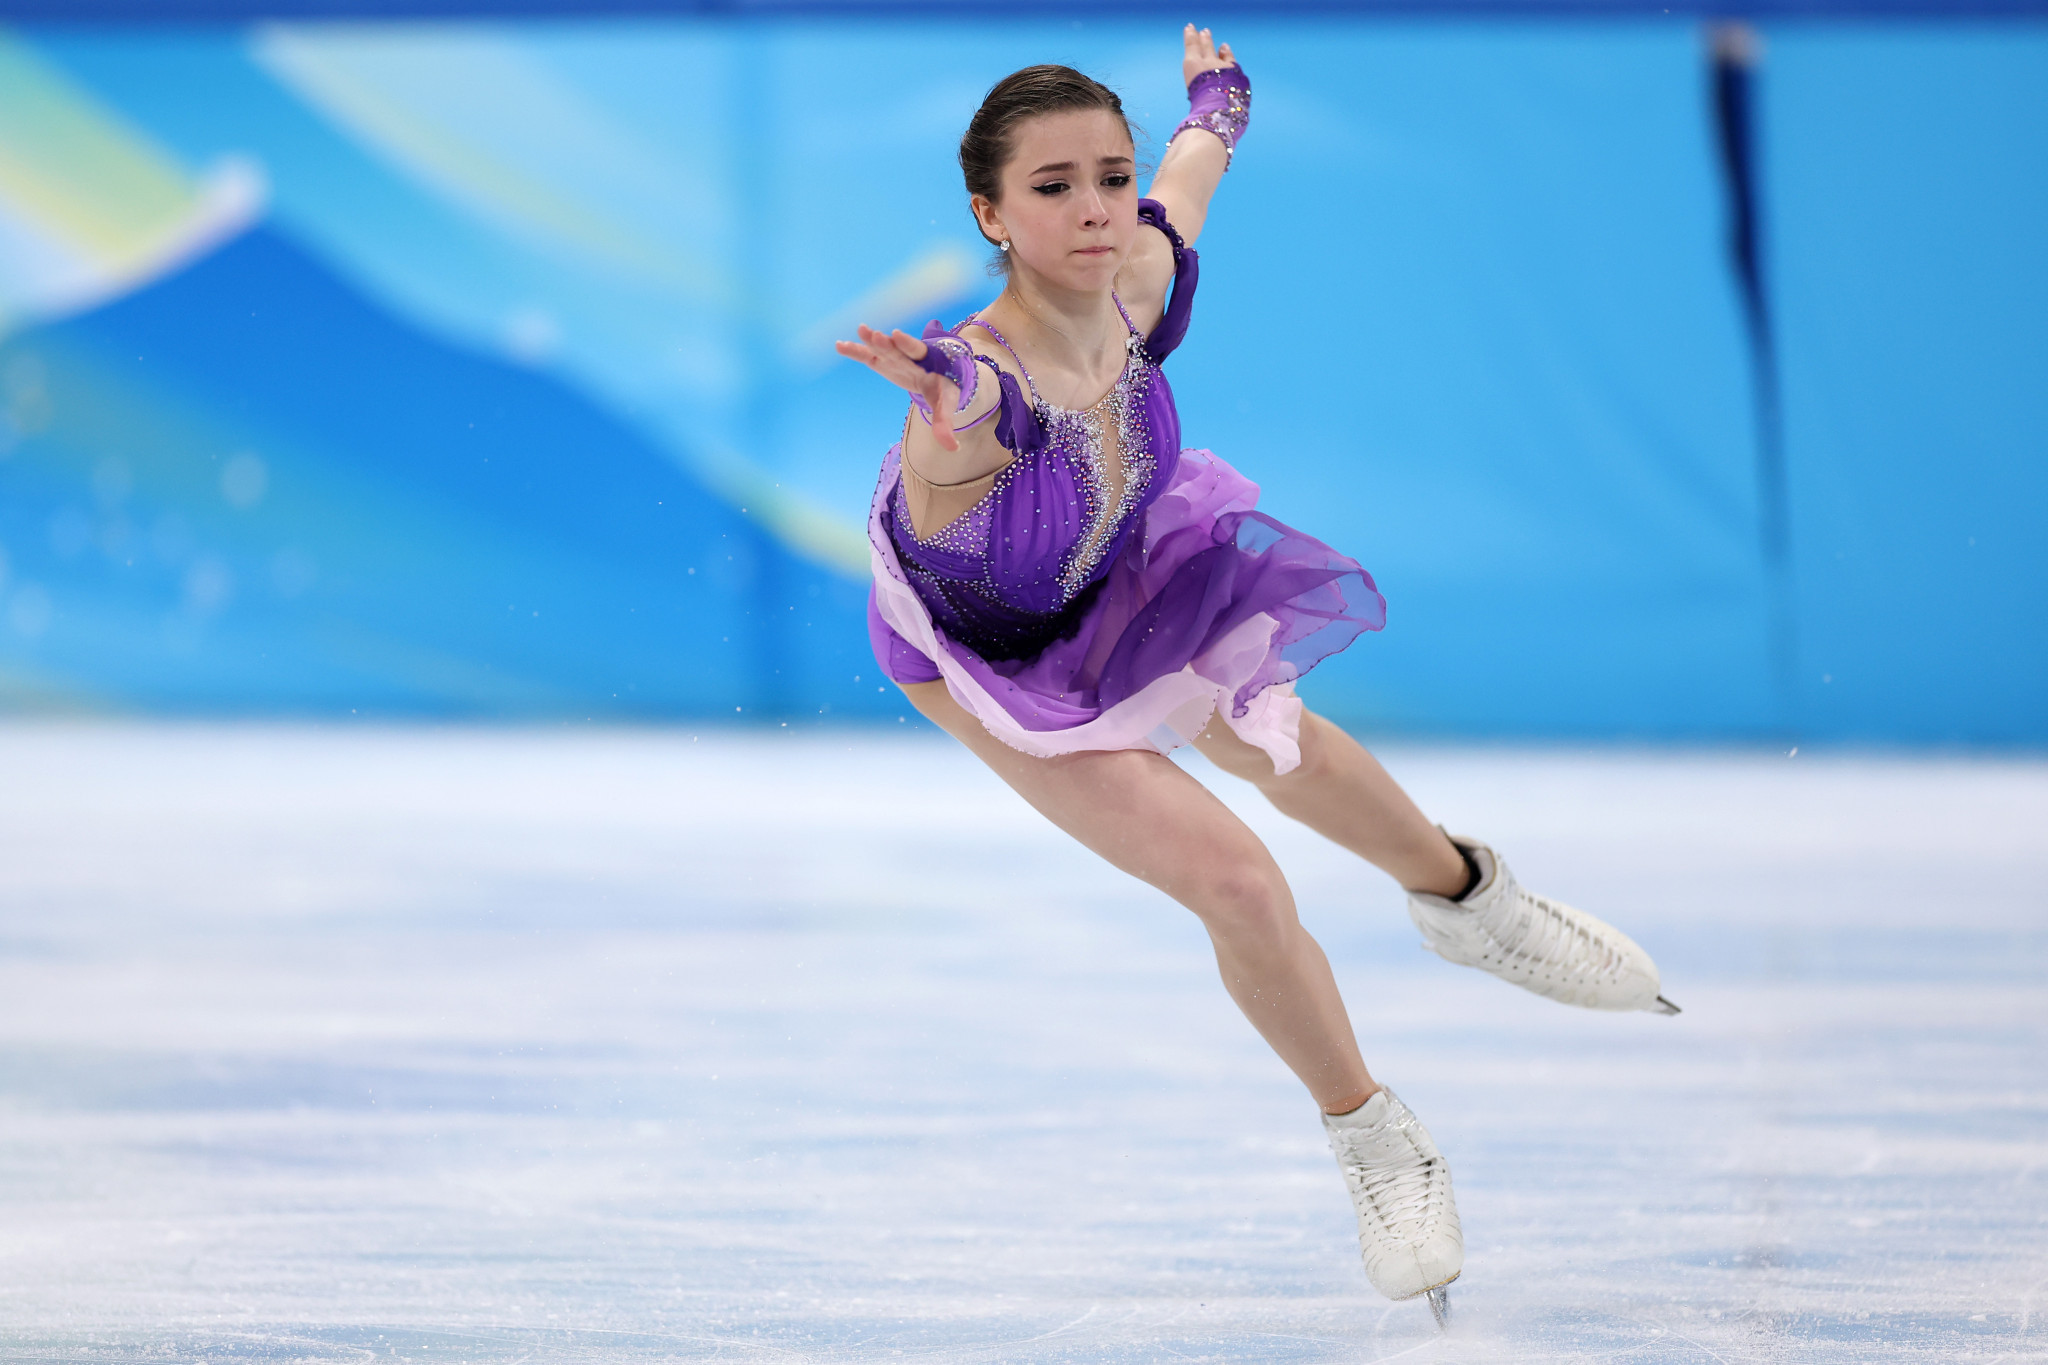 Kamila Valieva has been cleared to participate in the women’s singles figure skating event today ©Getty Images